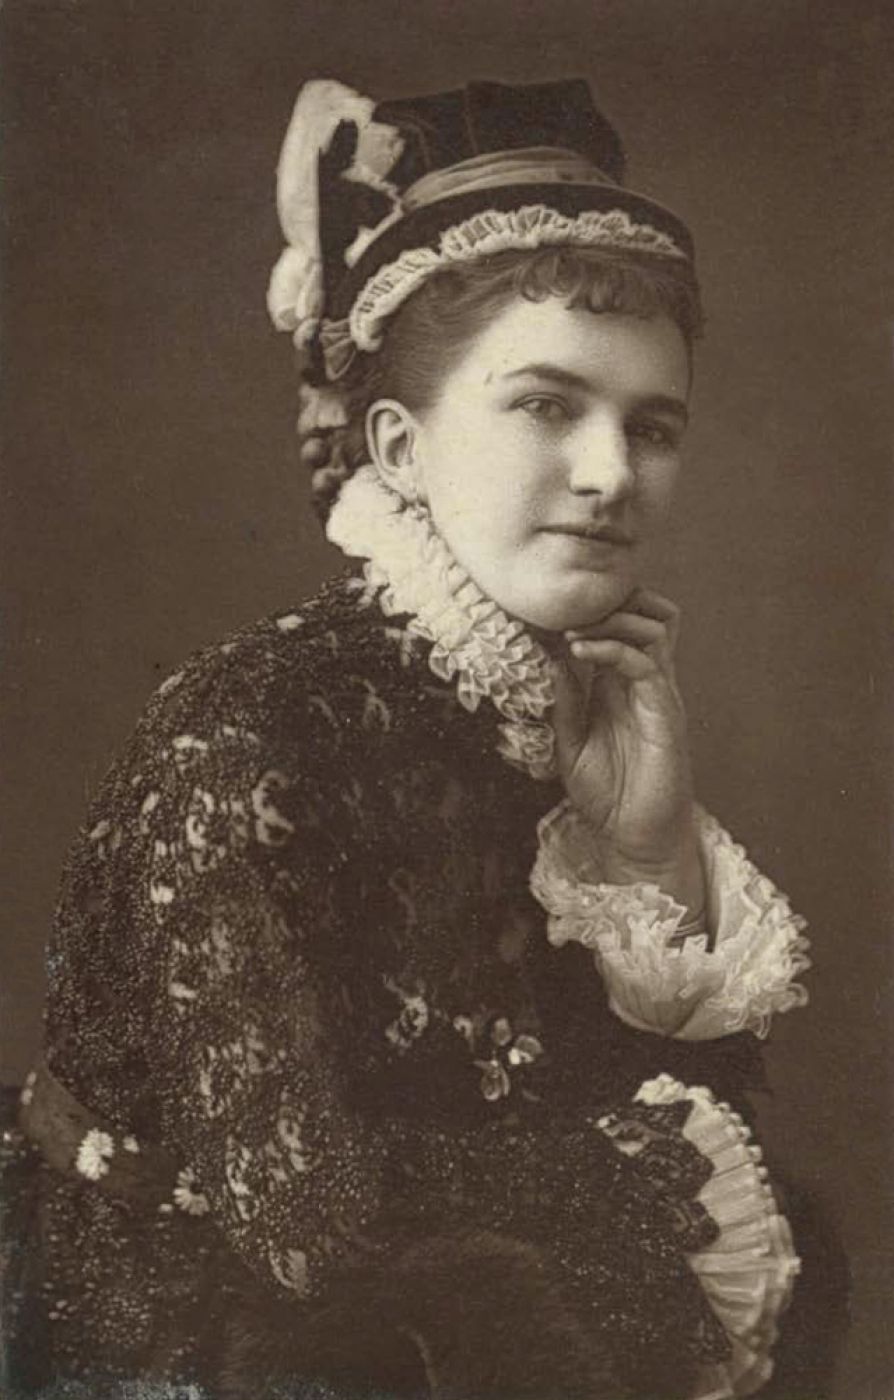 Anonymous, “Frederick Park as Fanny”, 1890 ca.